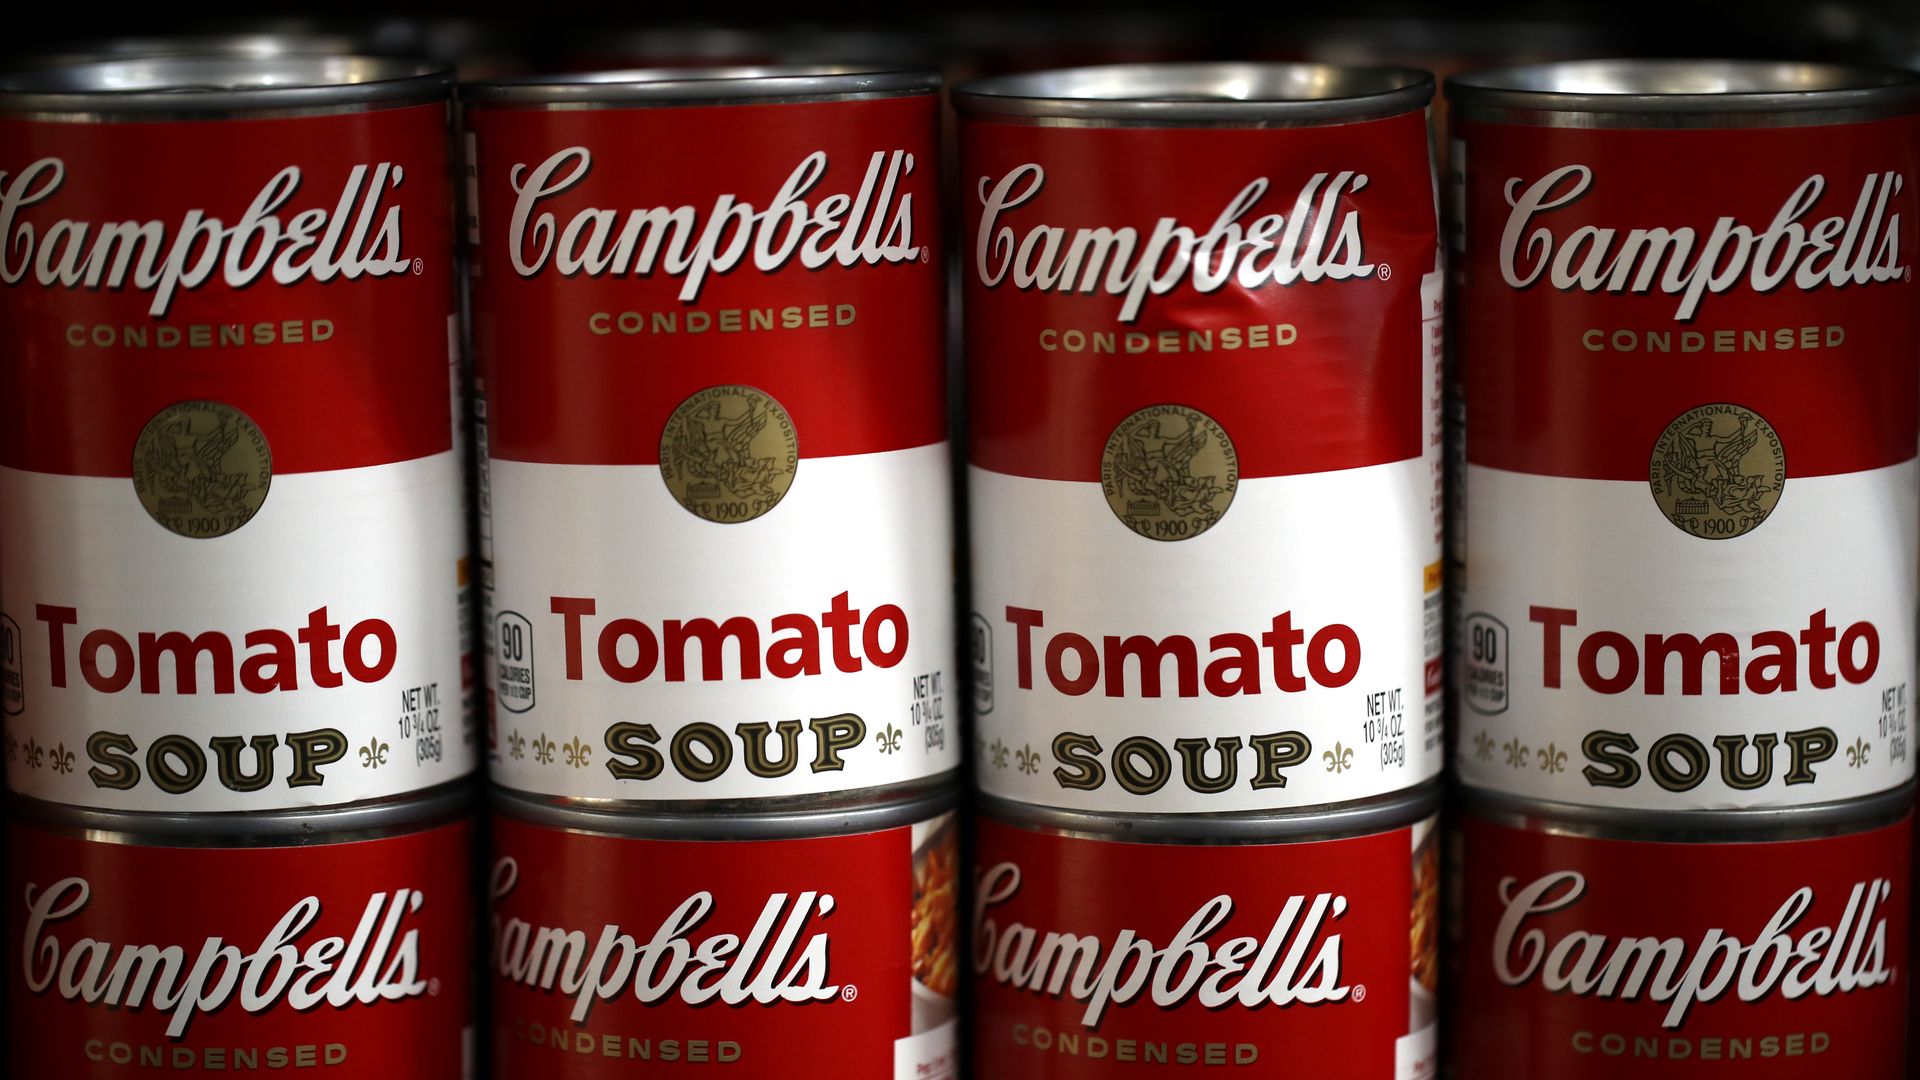 Campbell's tomato soup cans stacked